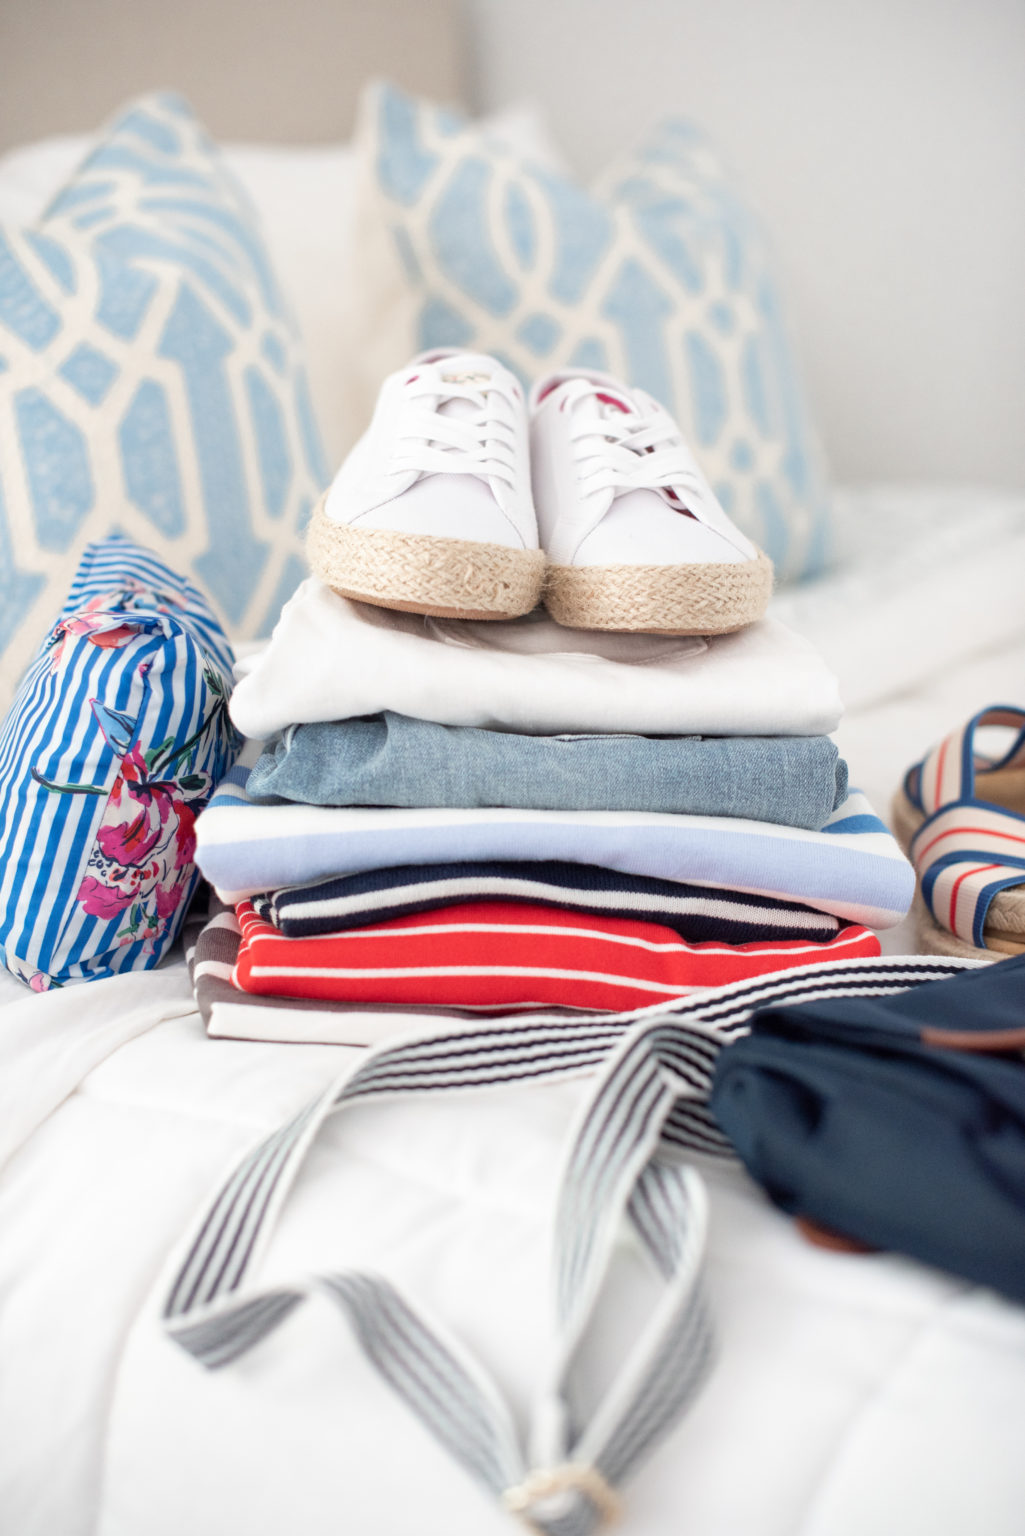 Summer Capsule Wardrobe Featuring Joules - Life on Phillips Lane